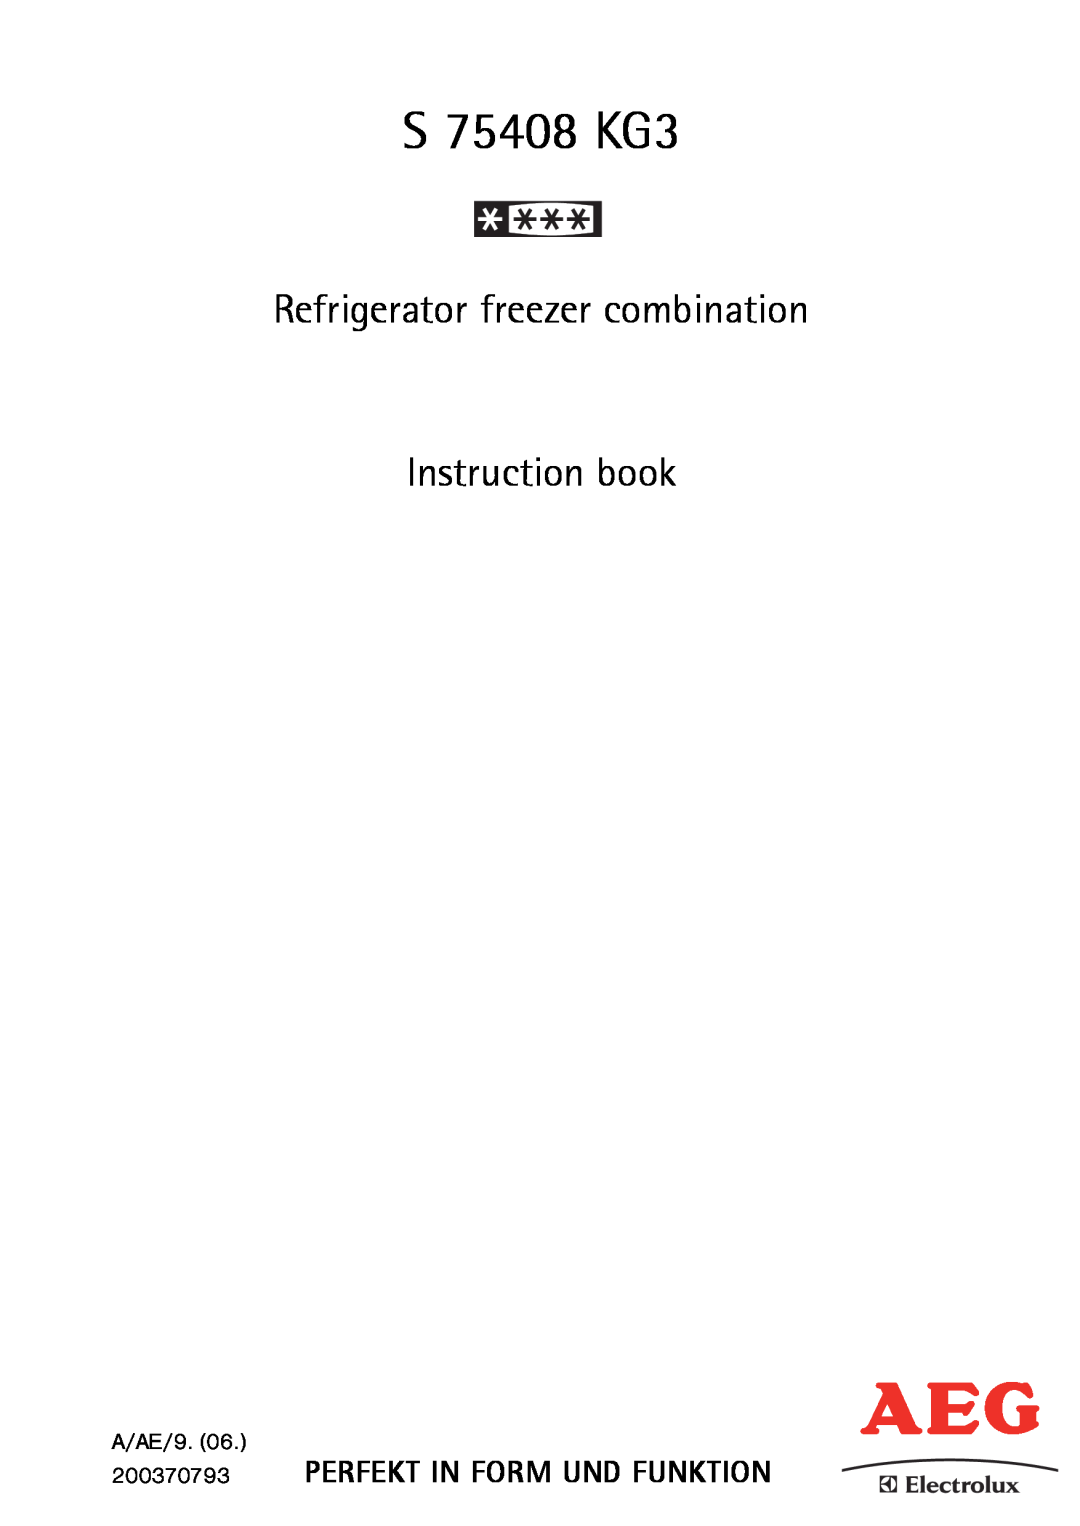 Electrolux S 75408 KG3 manual Refrigerator freezer combination Instruction book, Perfekt In Form Und Funktion, A/AE/9 